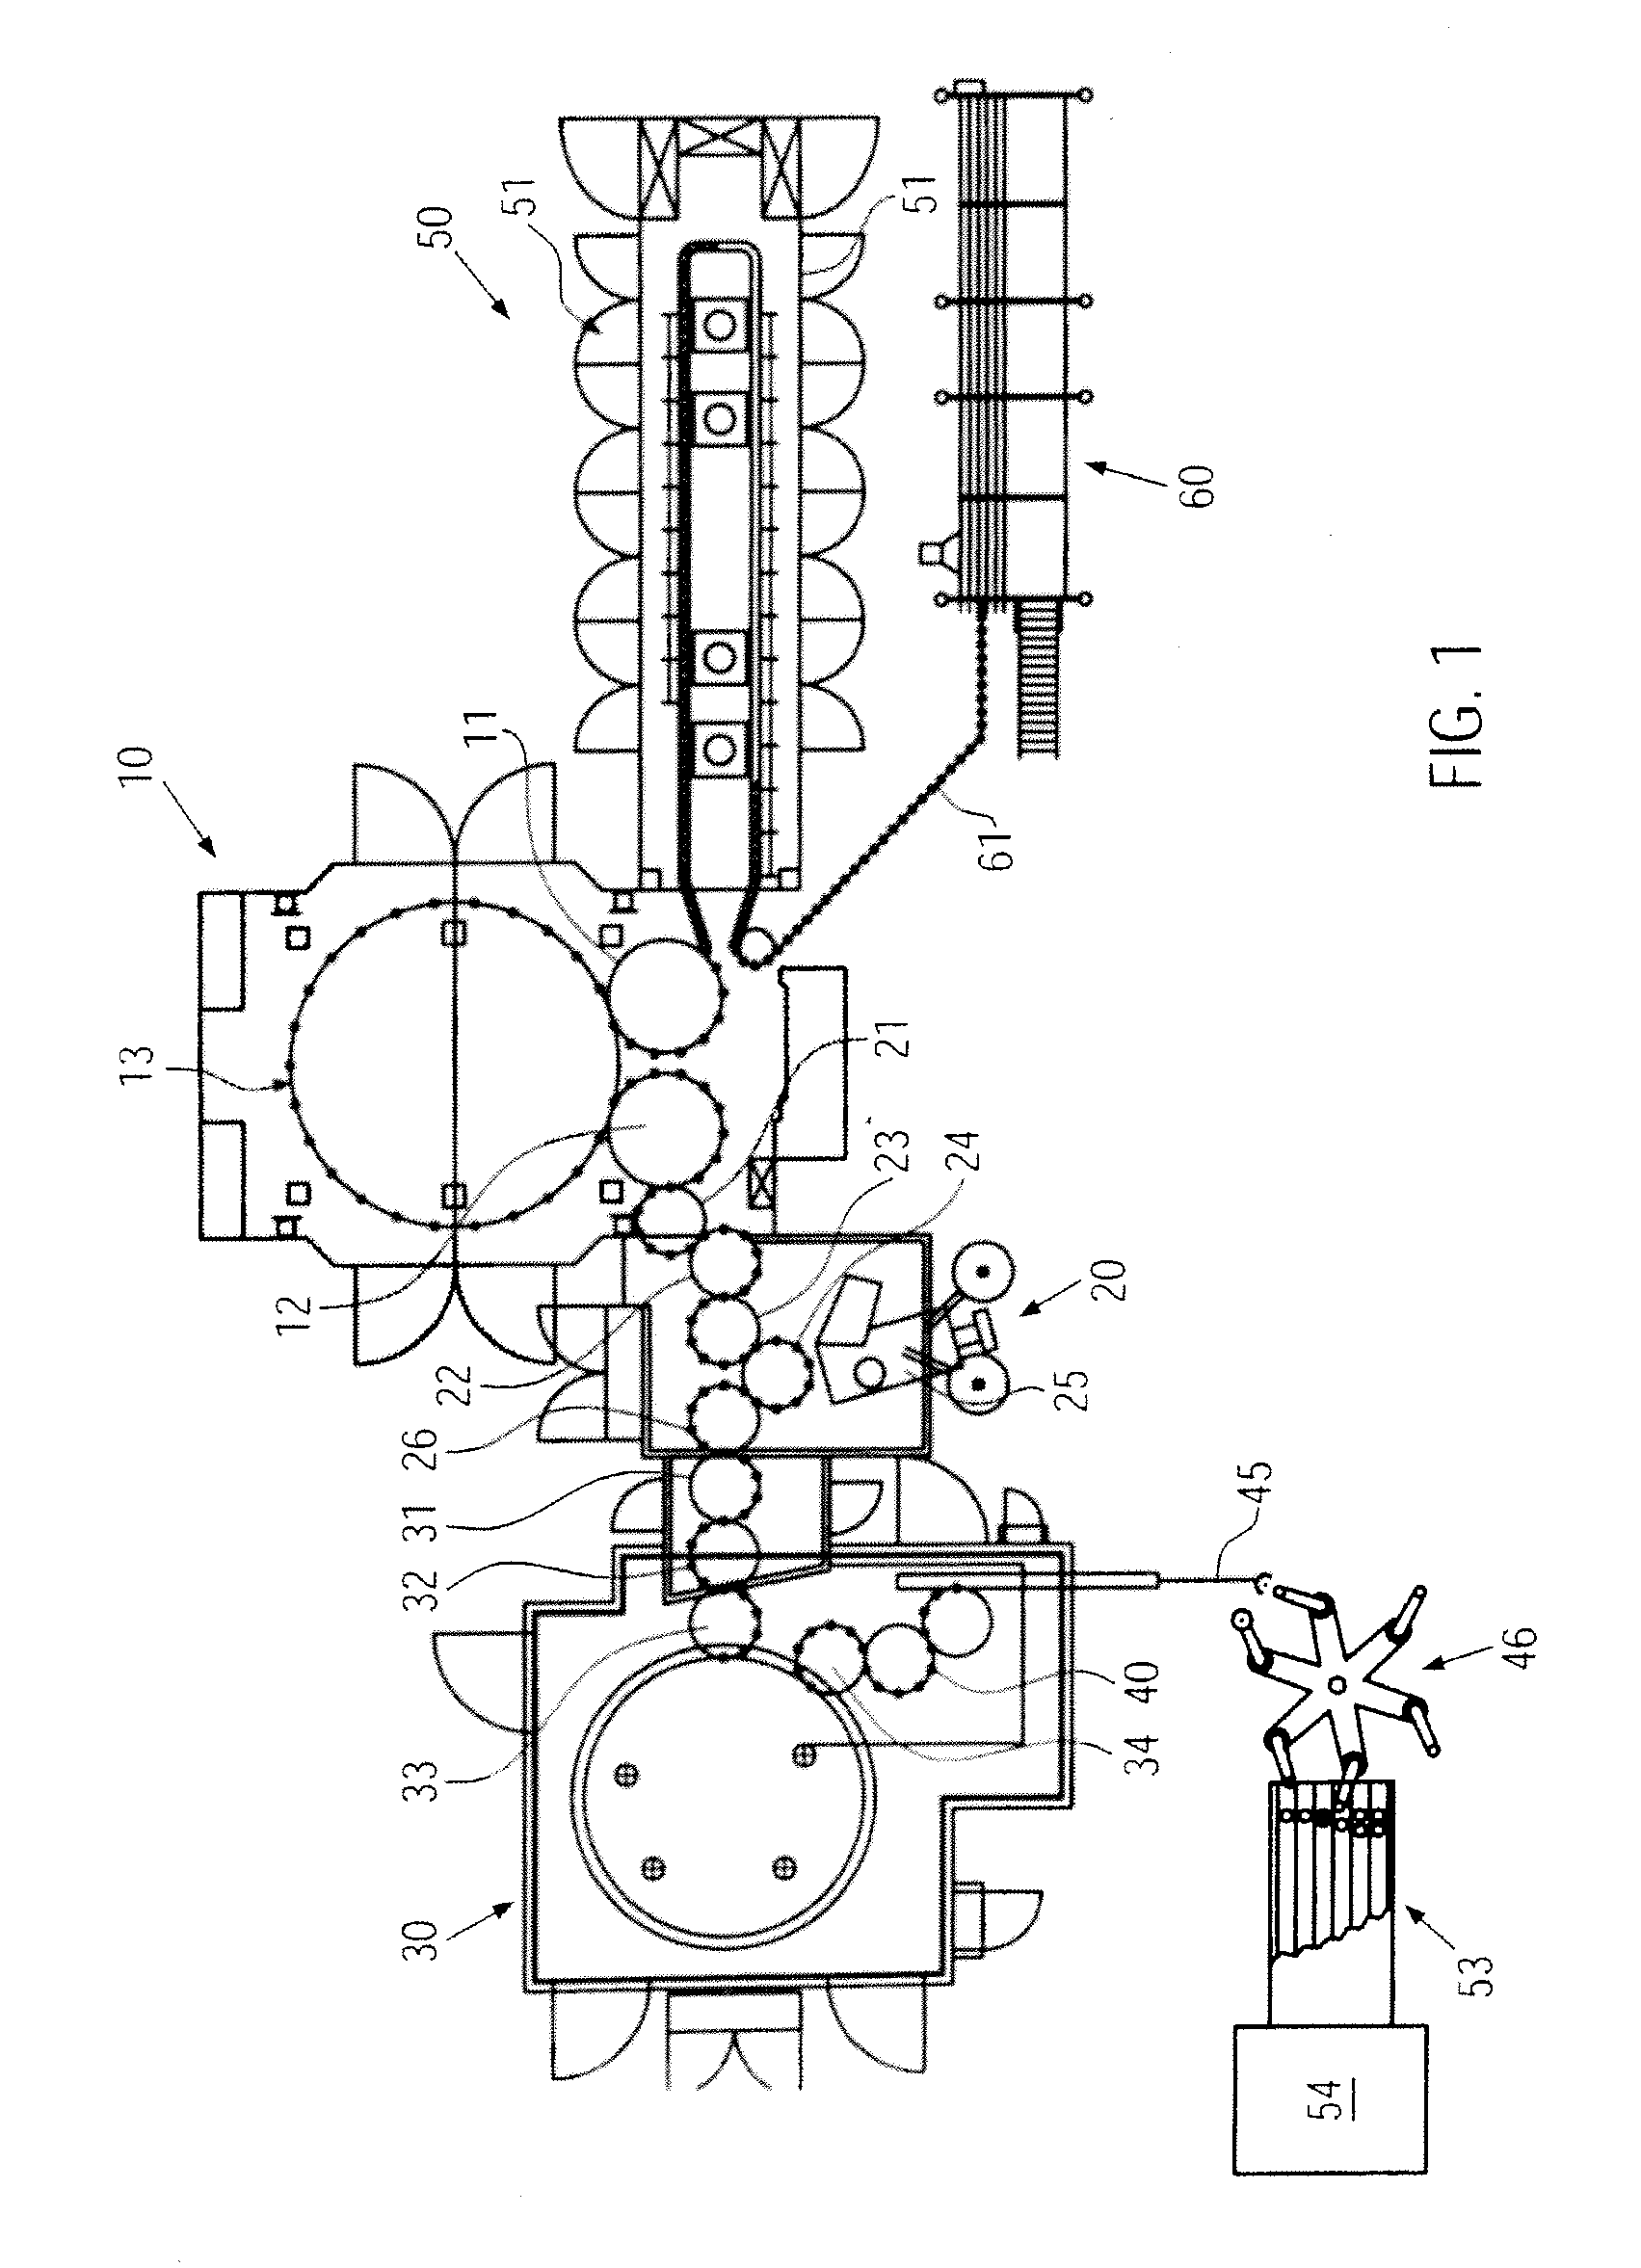 Apparatus and Method for Producing Plastic Bottles